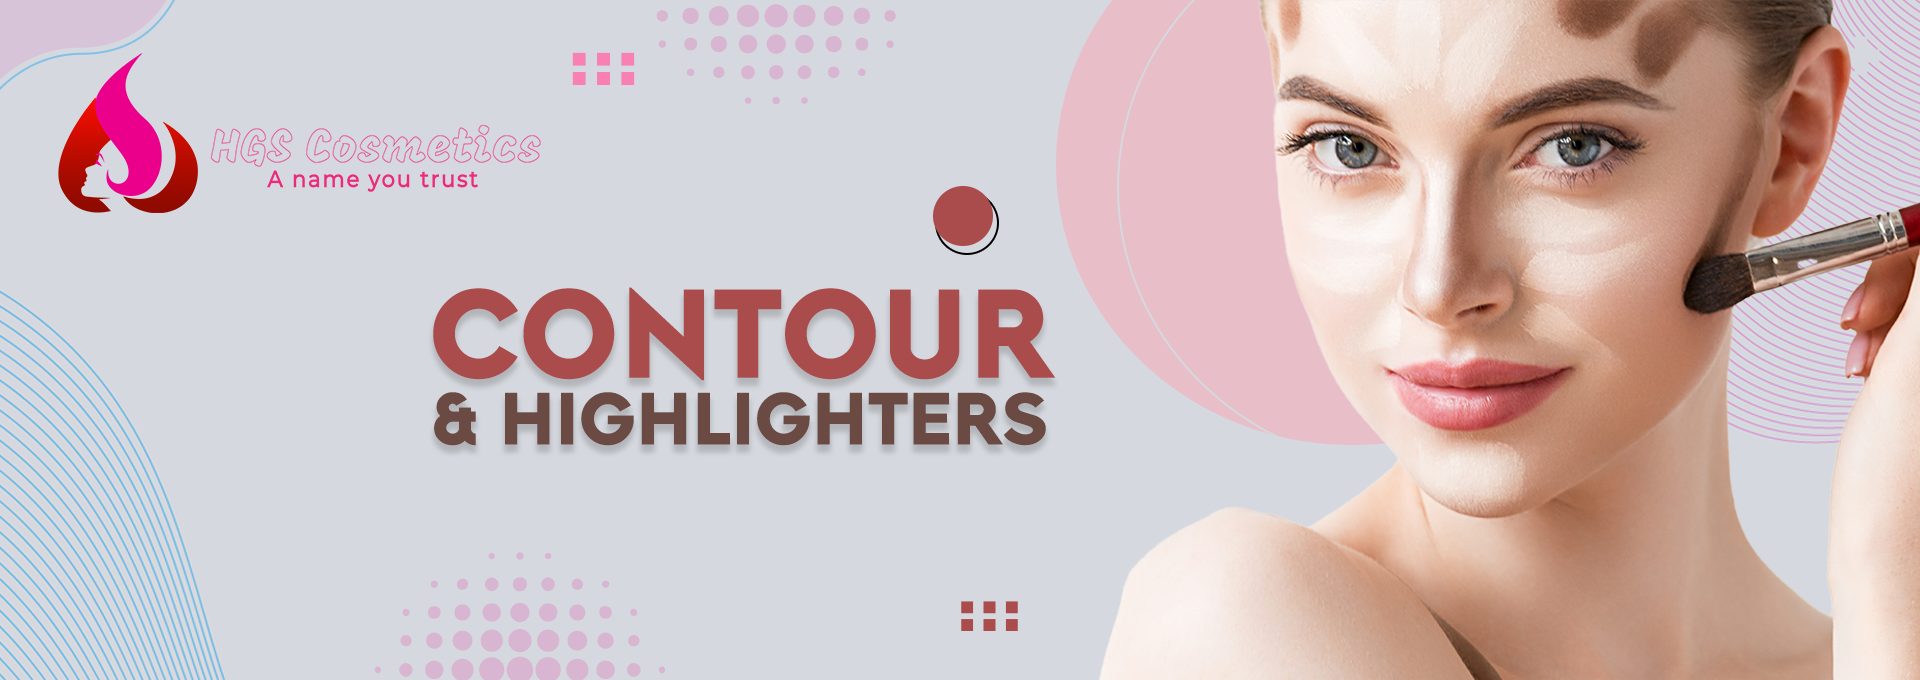 Shop Best Contour & Highlighters products Online @ HGS Cosmetics